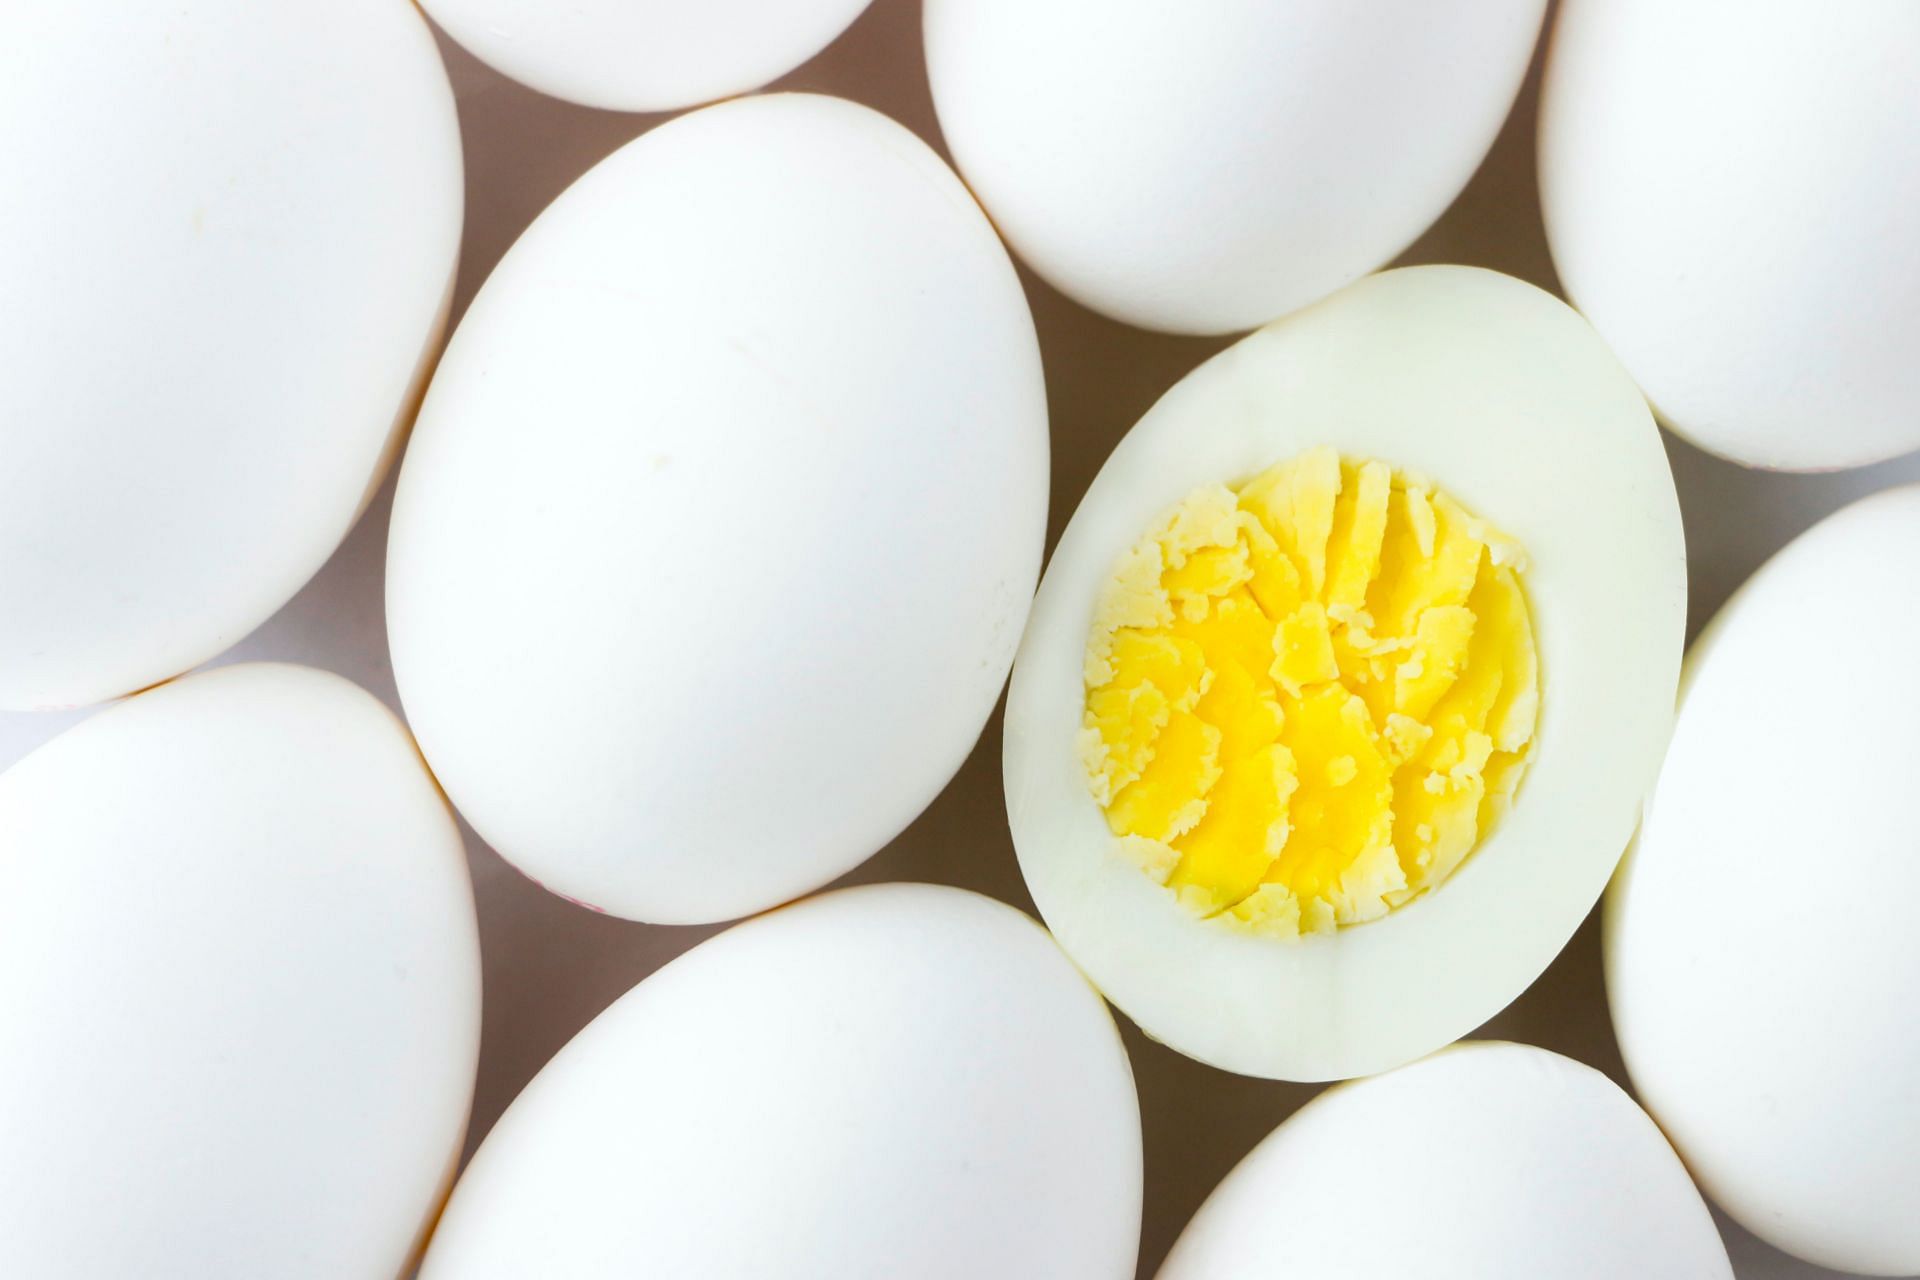 The use of eggs for weight loss migth be effective (Image via Unsplash/Mustafa Bashari)